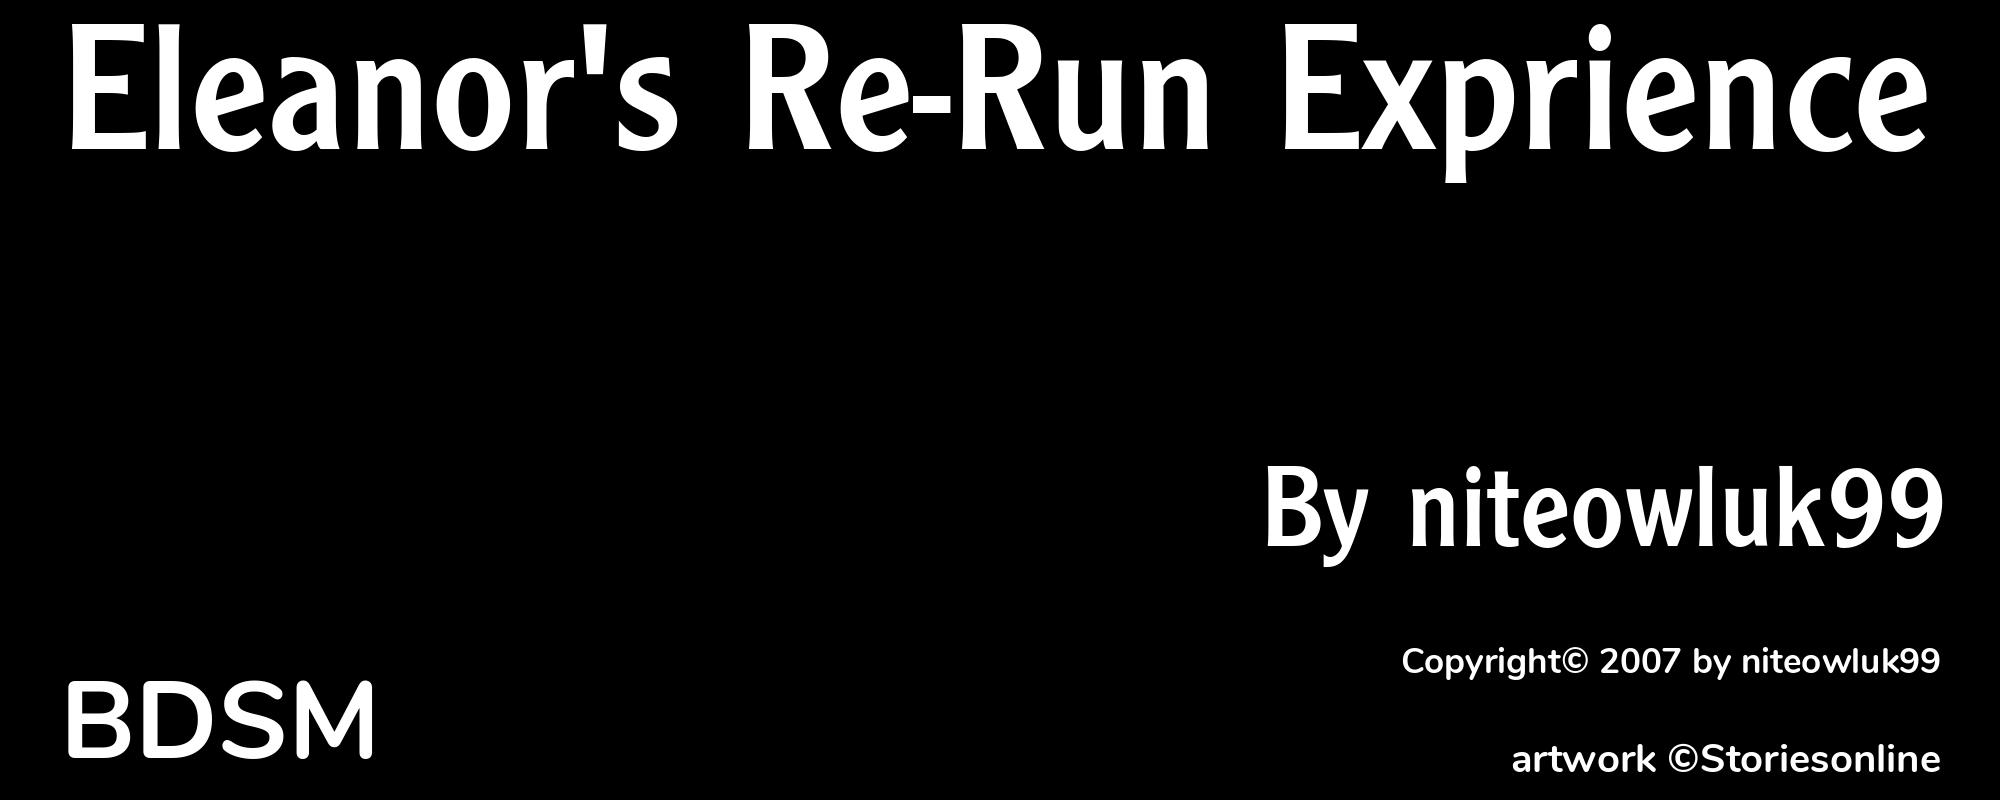 Eleanor's Re-Run Exprience - Cover